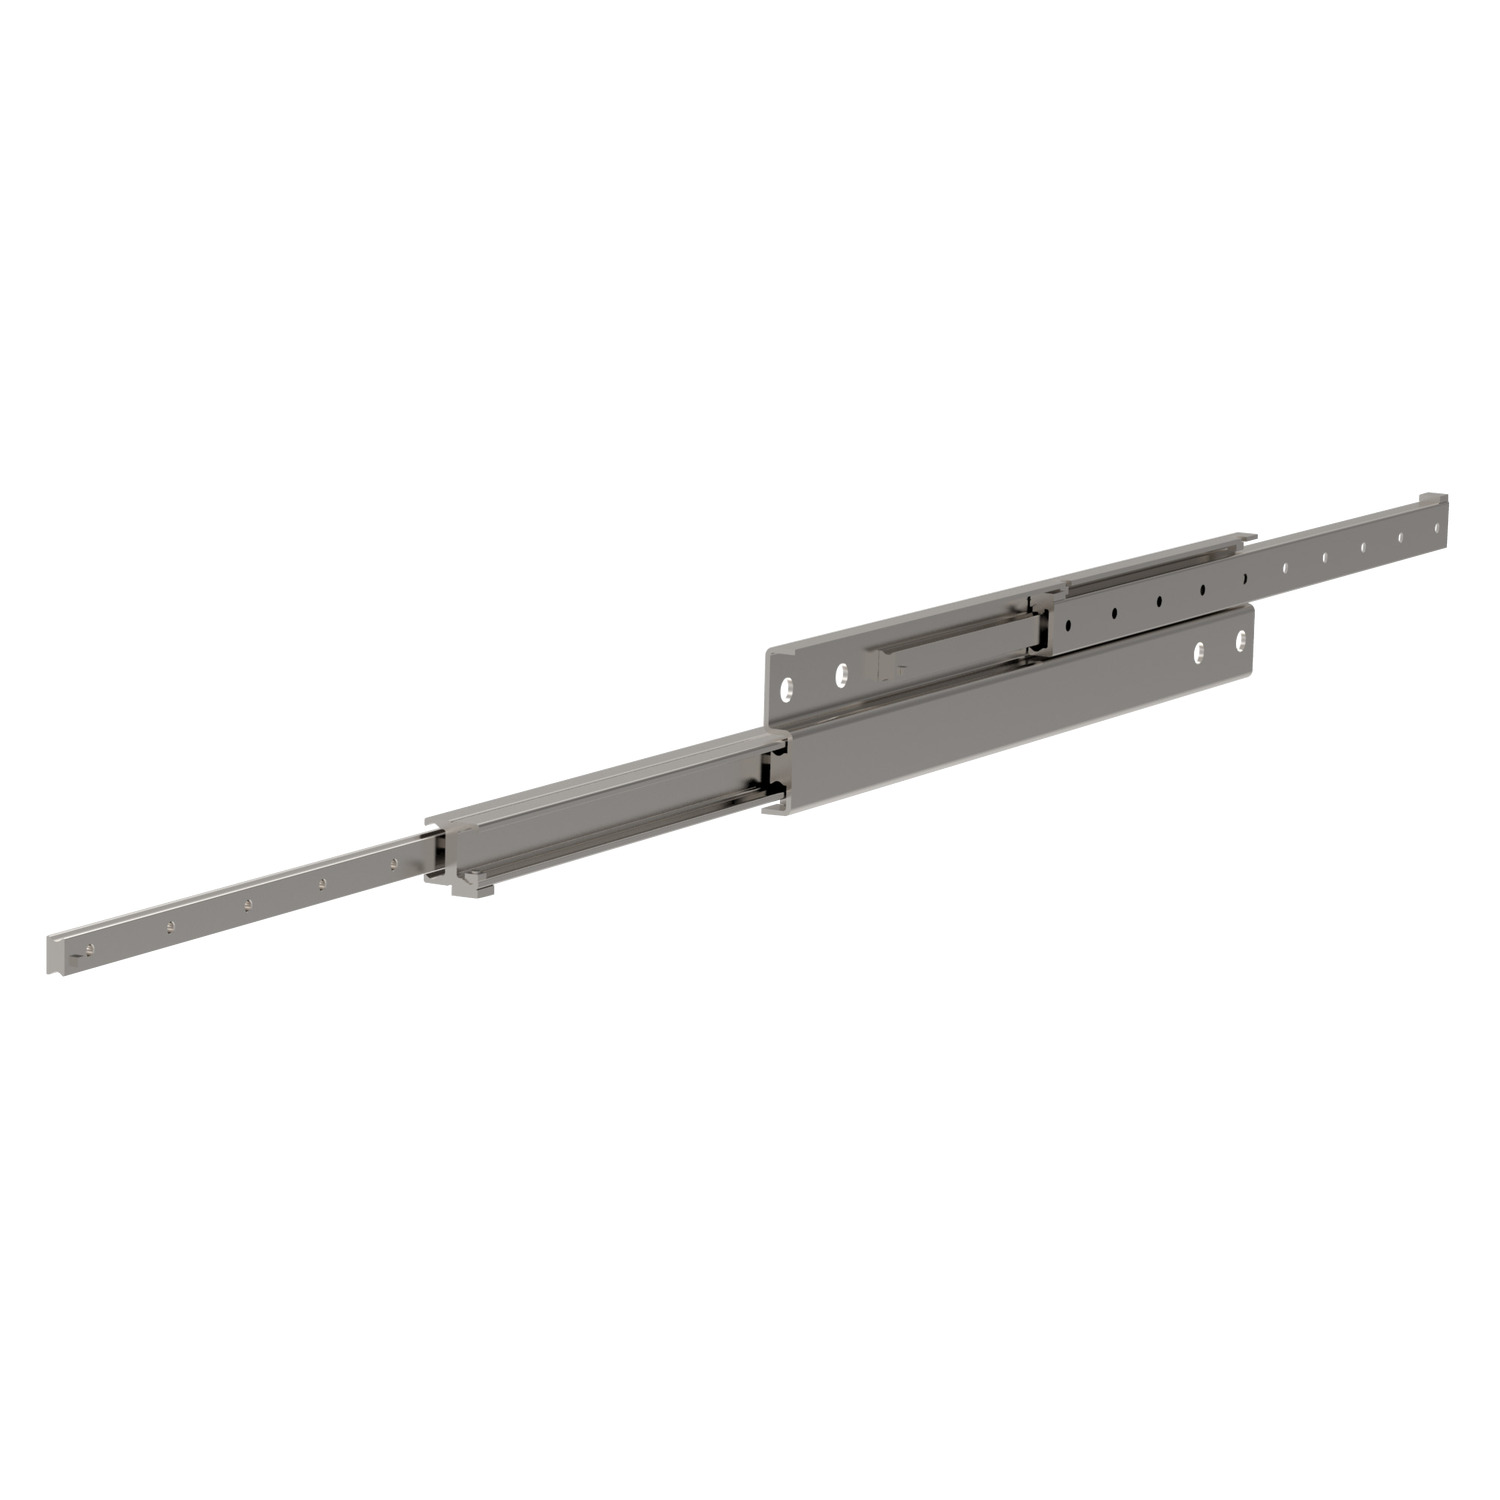 Extended Stroke Telescopic Slides These are extended stroke (150%), heavy duty telescopic rails, with high load capacity and stiffness.